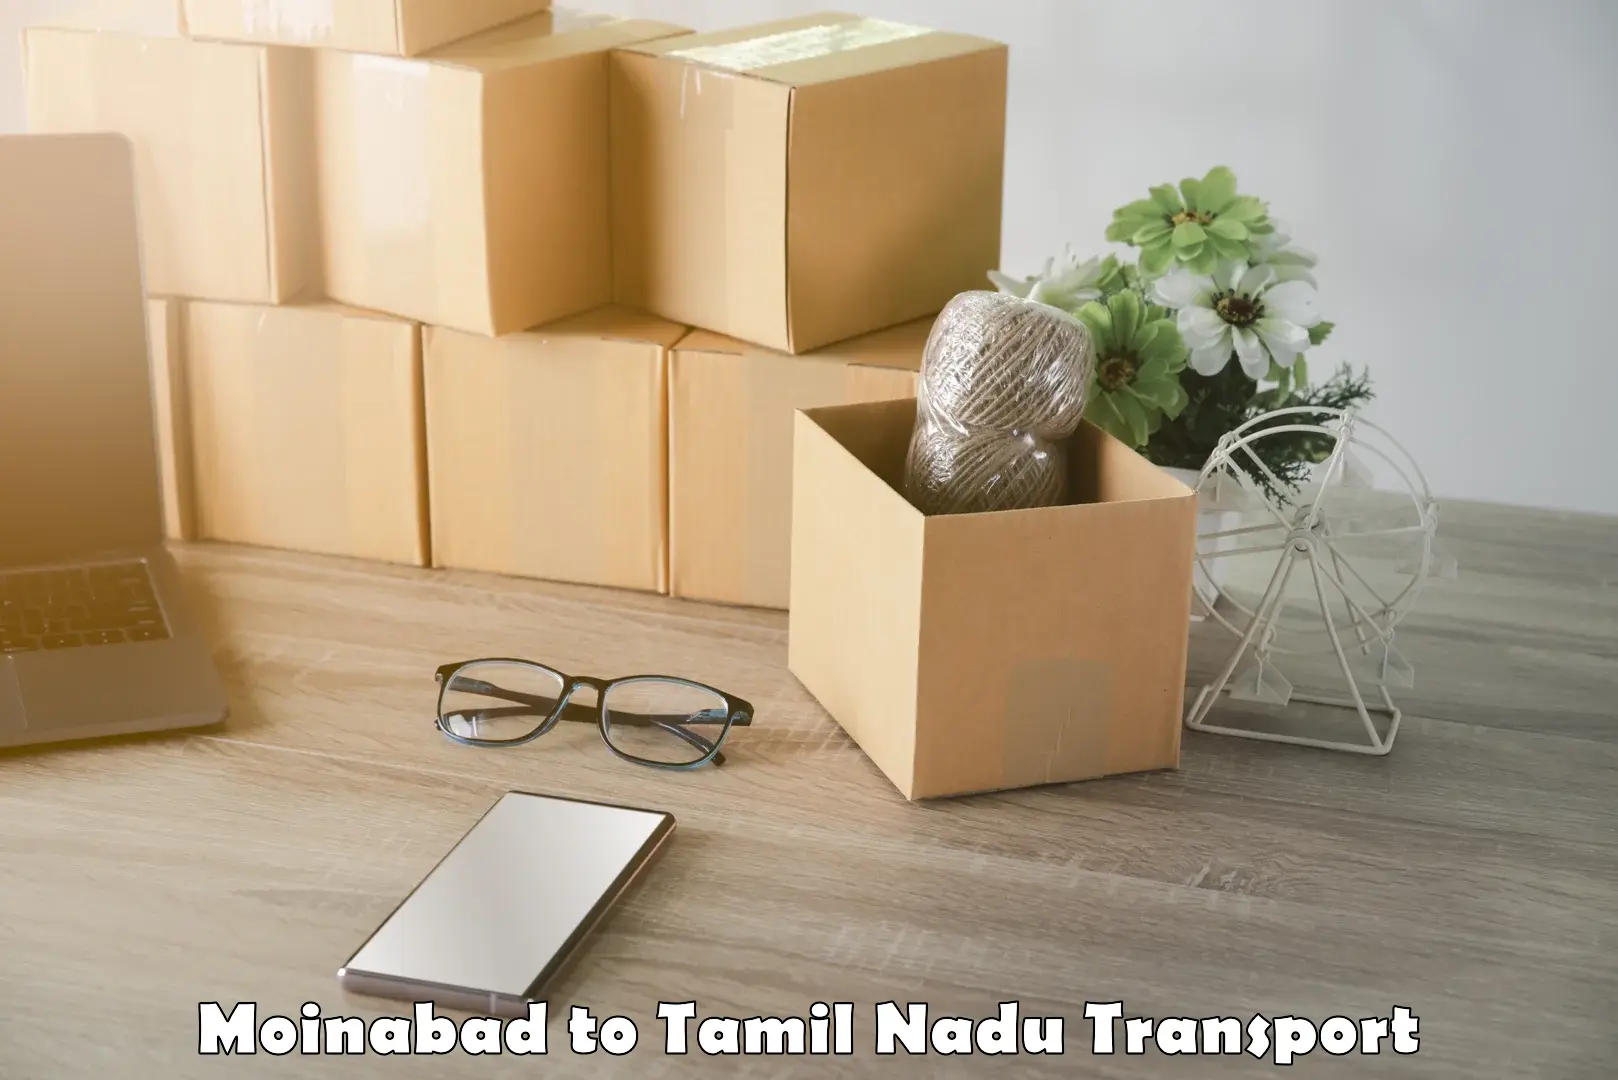 Truck transport companies in India Moinabad to Tuticorin Port